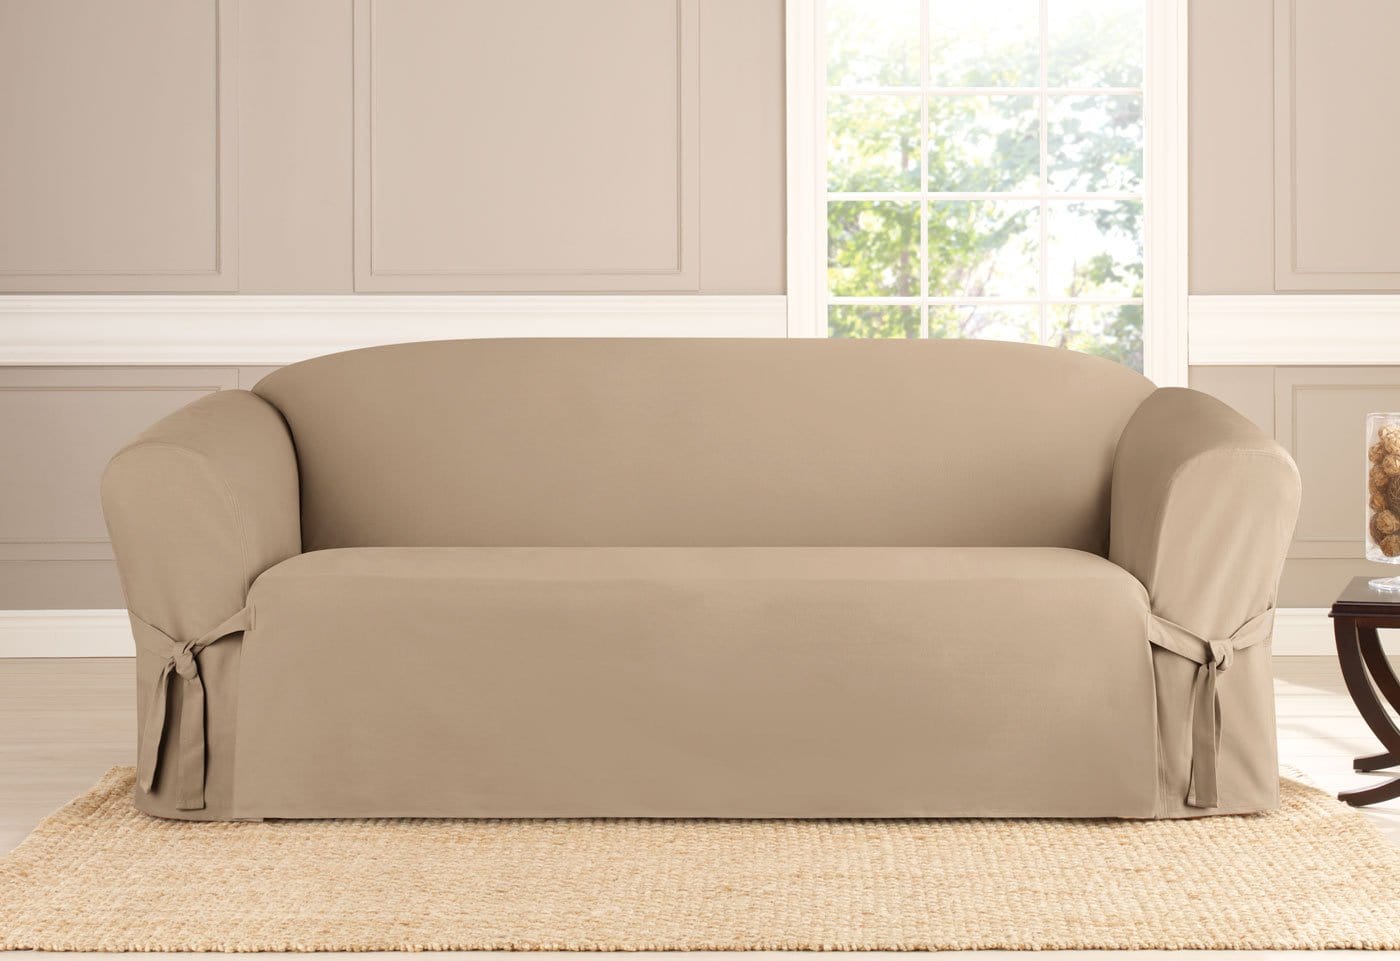 Cotton Solid 180x270 CM also available on picture- 							INTA UNITA 180X270 CM,DISPONIBILE ANCHE SU MISUR data-mtsrclang=en-US href=# onclick=return false; 							show original title Details about   Sofa cover cover everything 